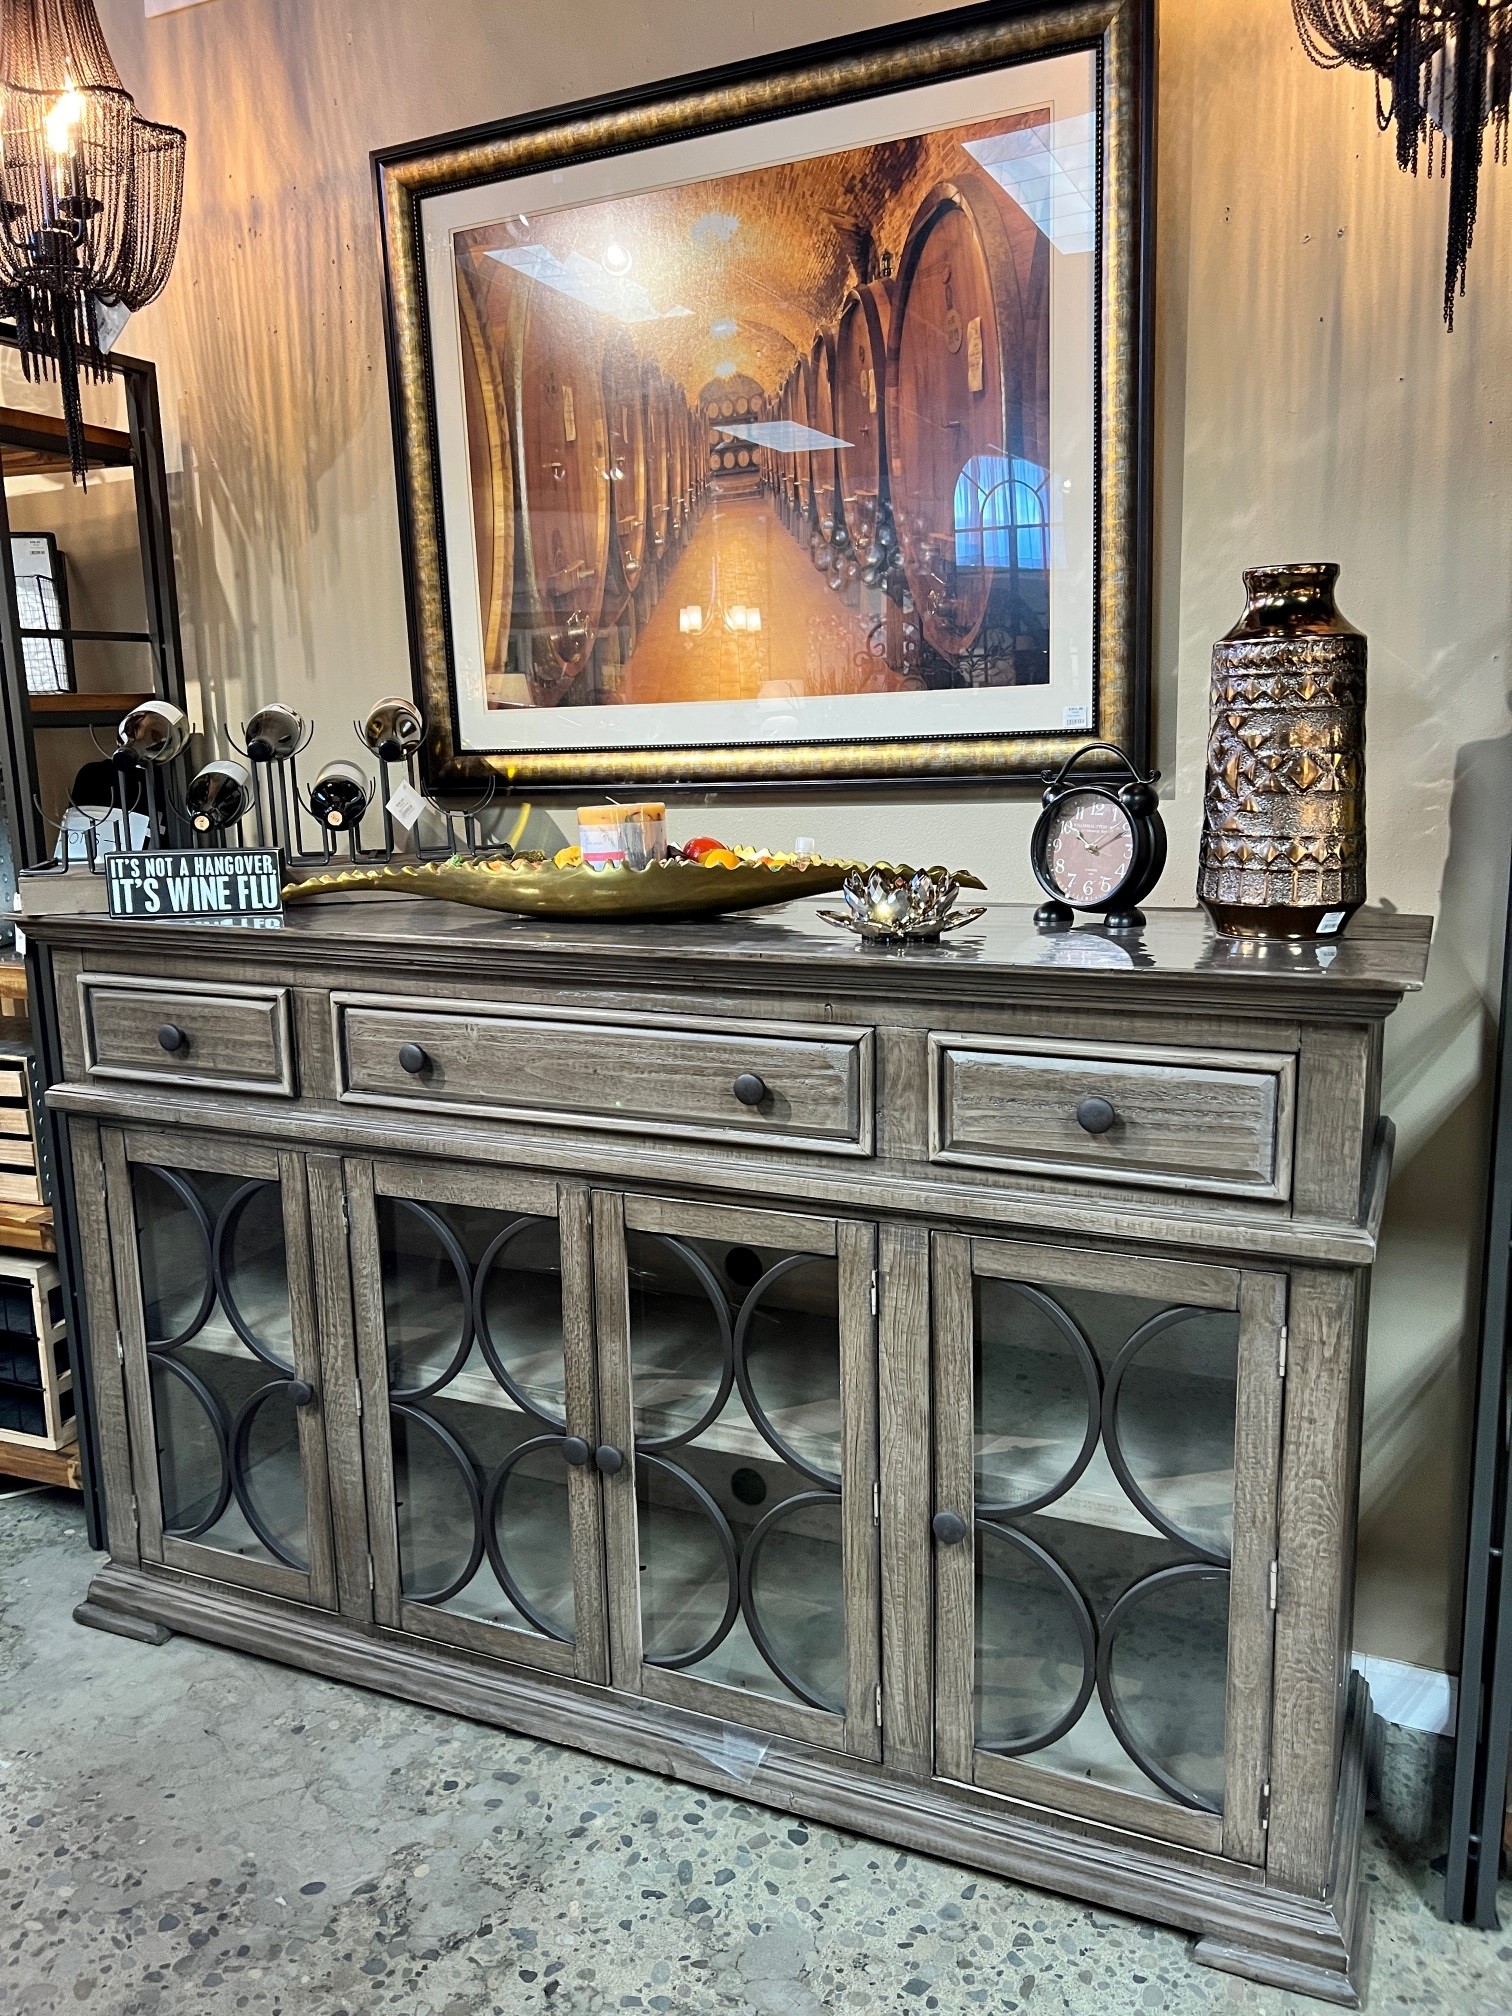 Wine cabinet with interior decor and winery painting